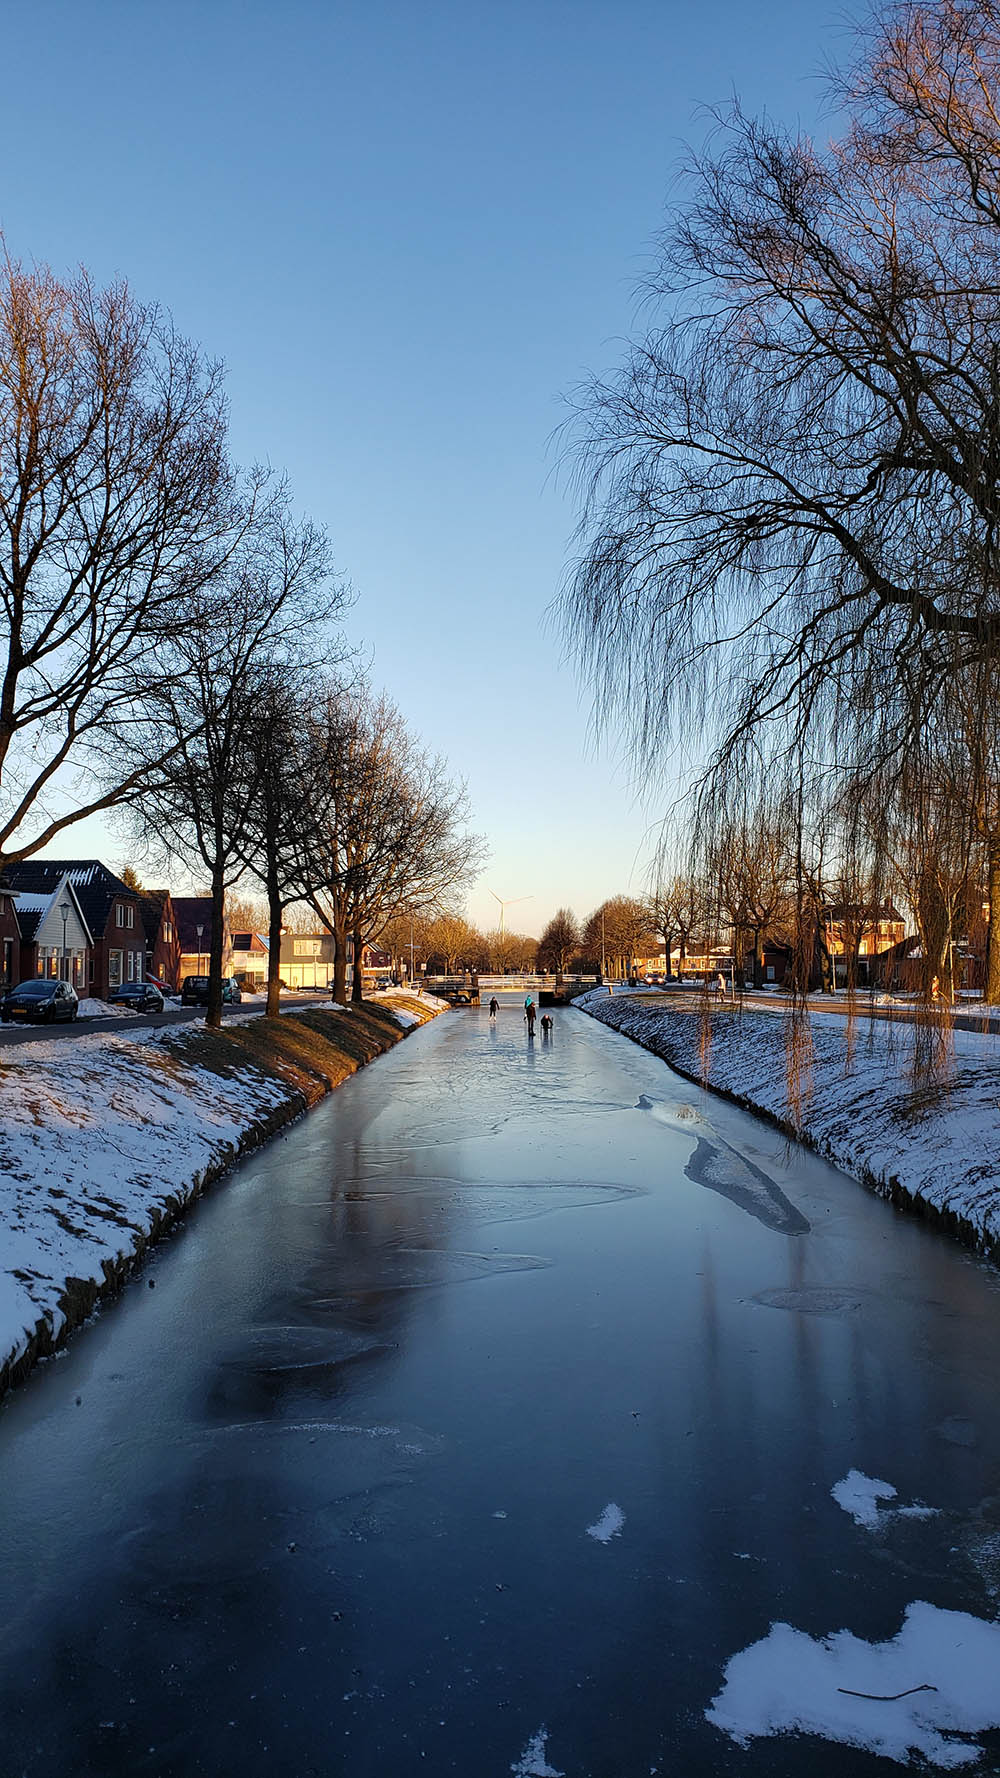 People skating on a frozen canal.